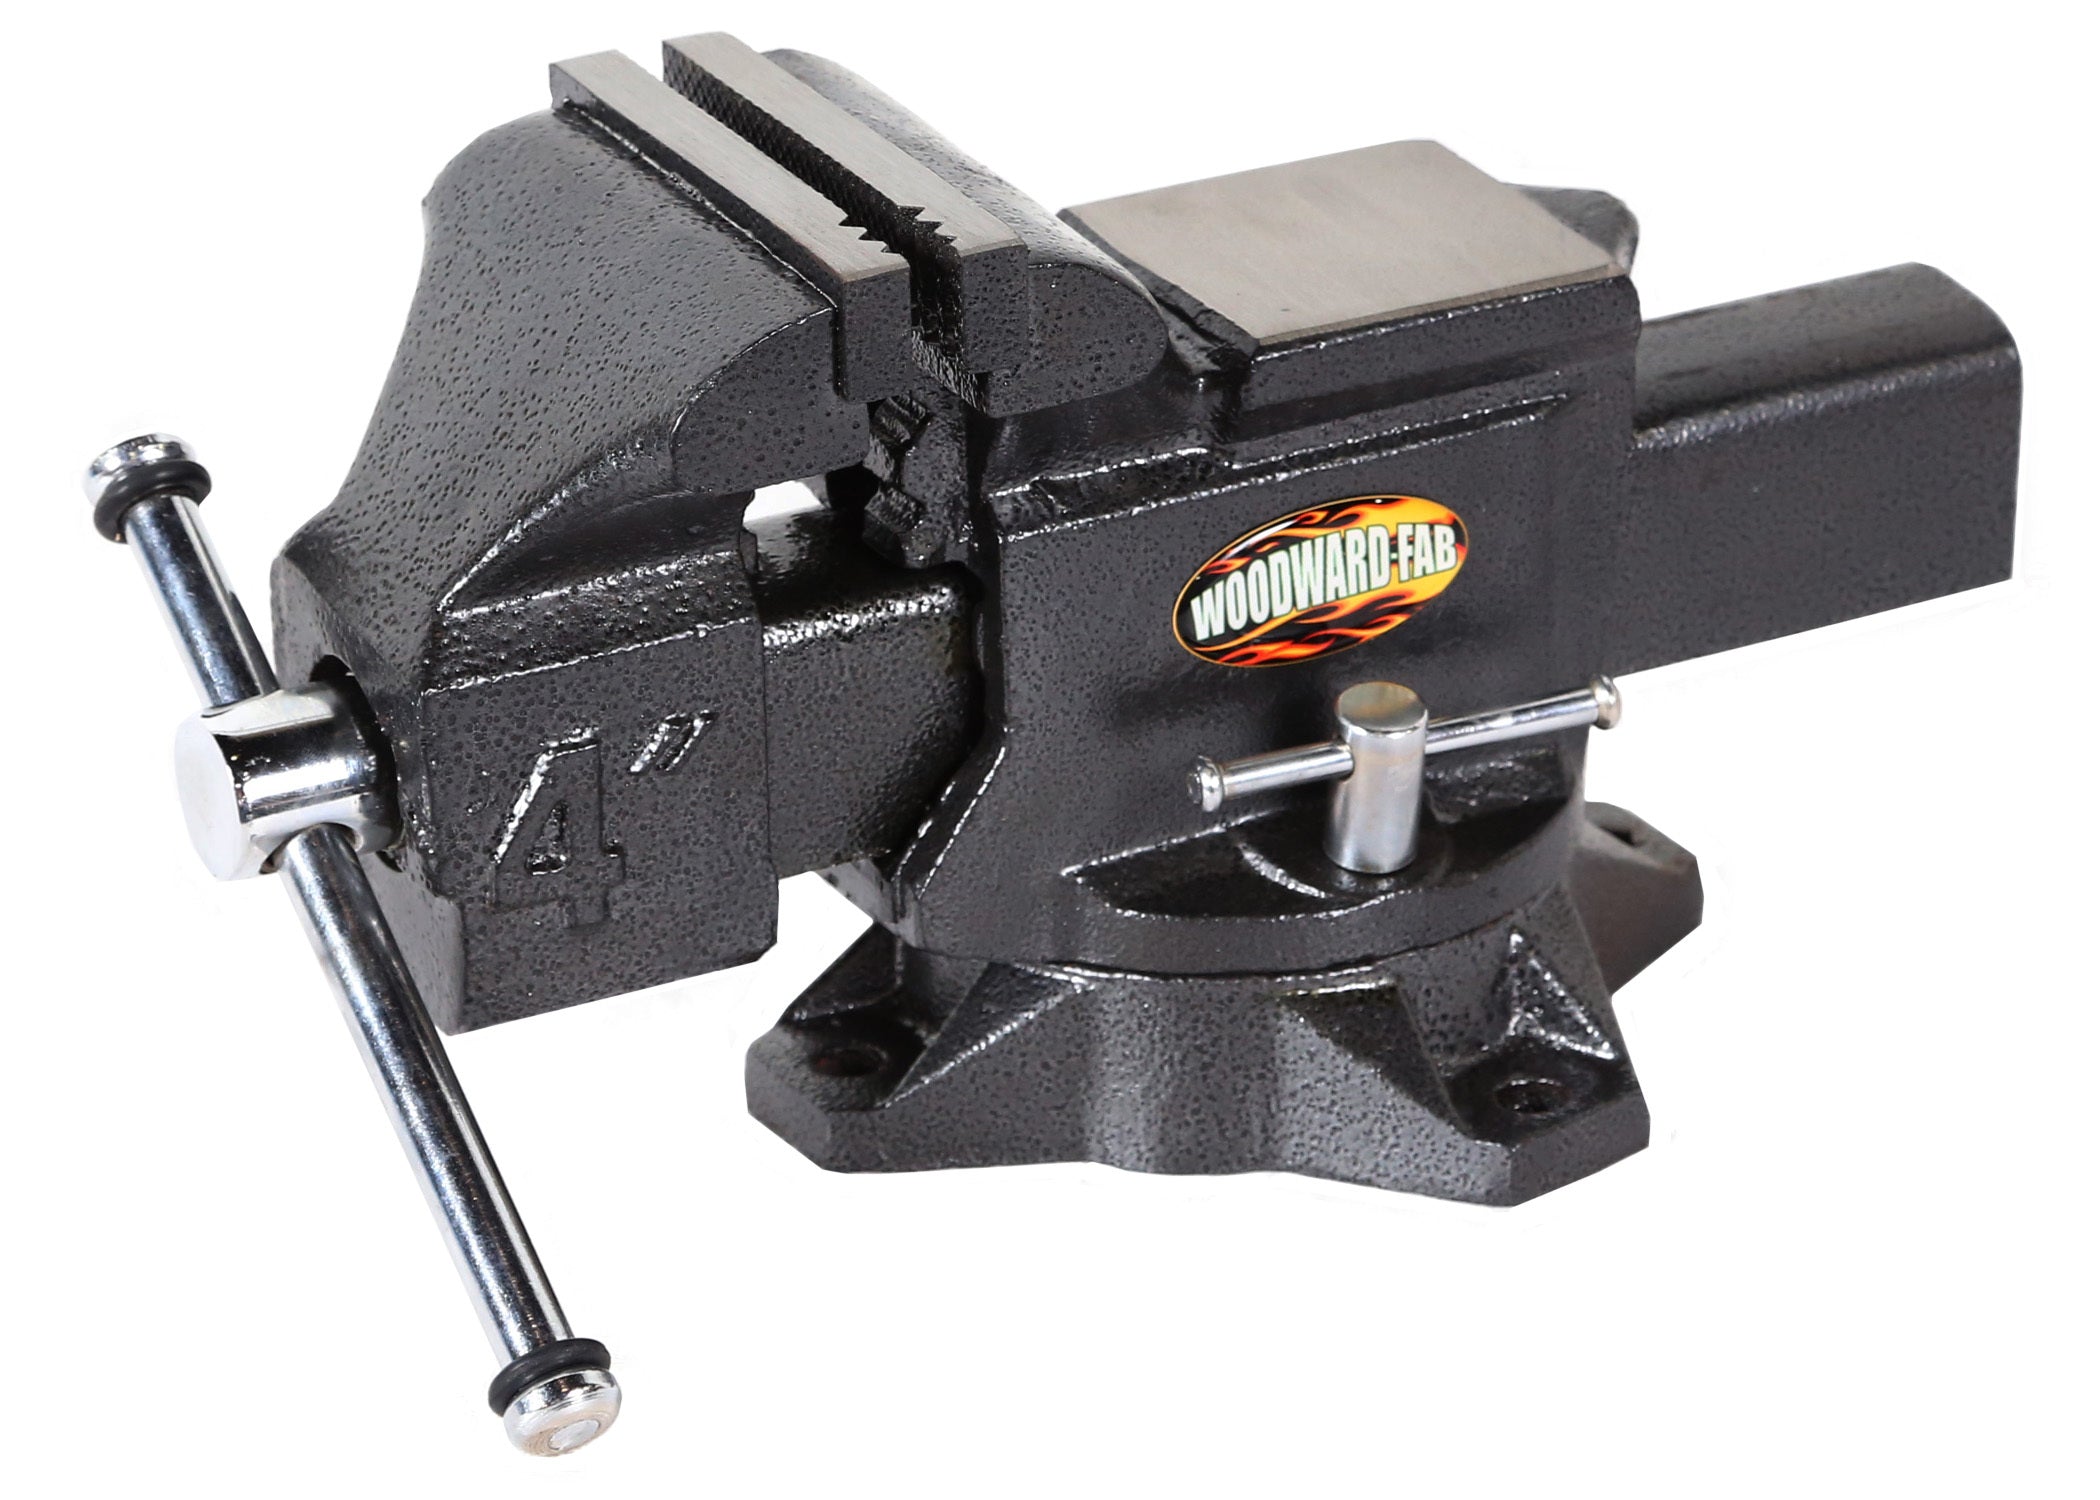 4In Cast Iron Bench Vise